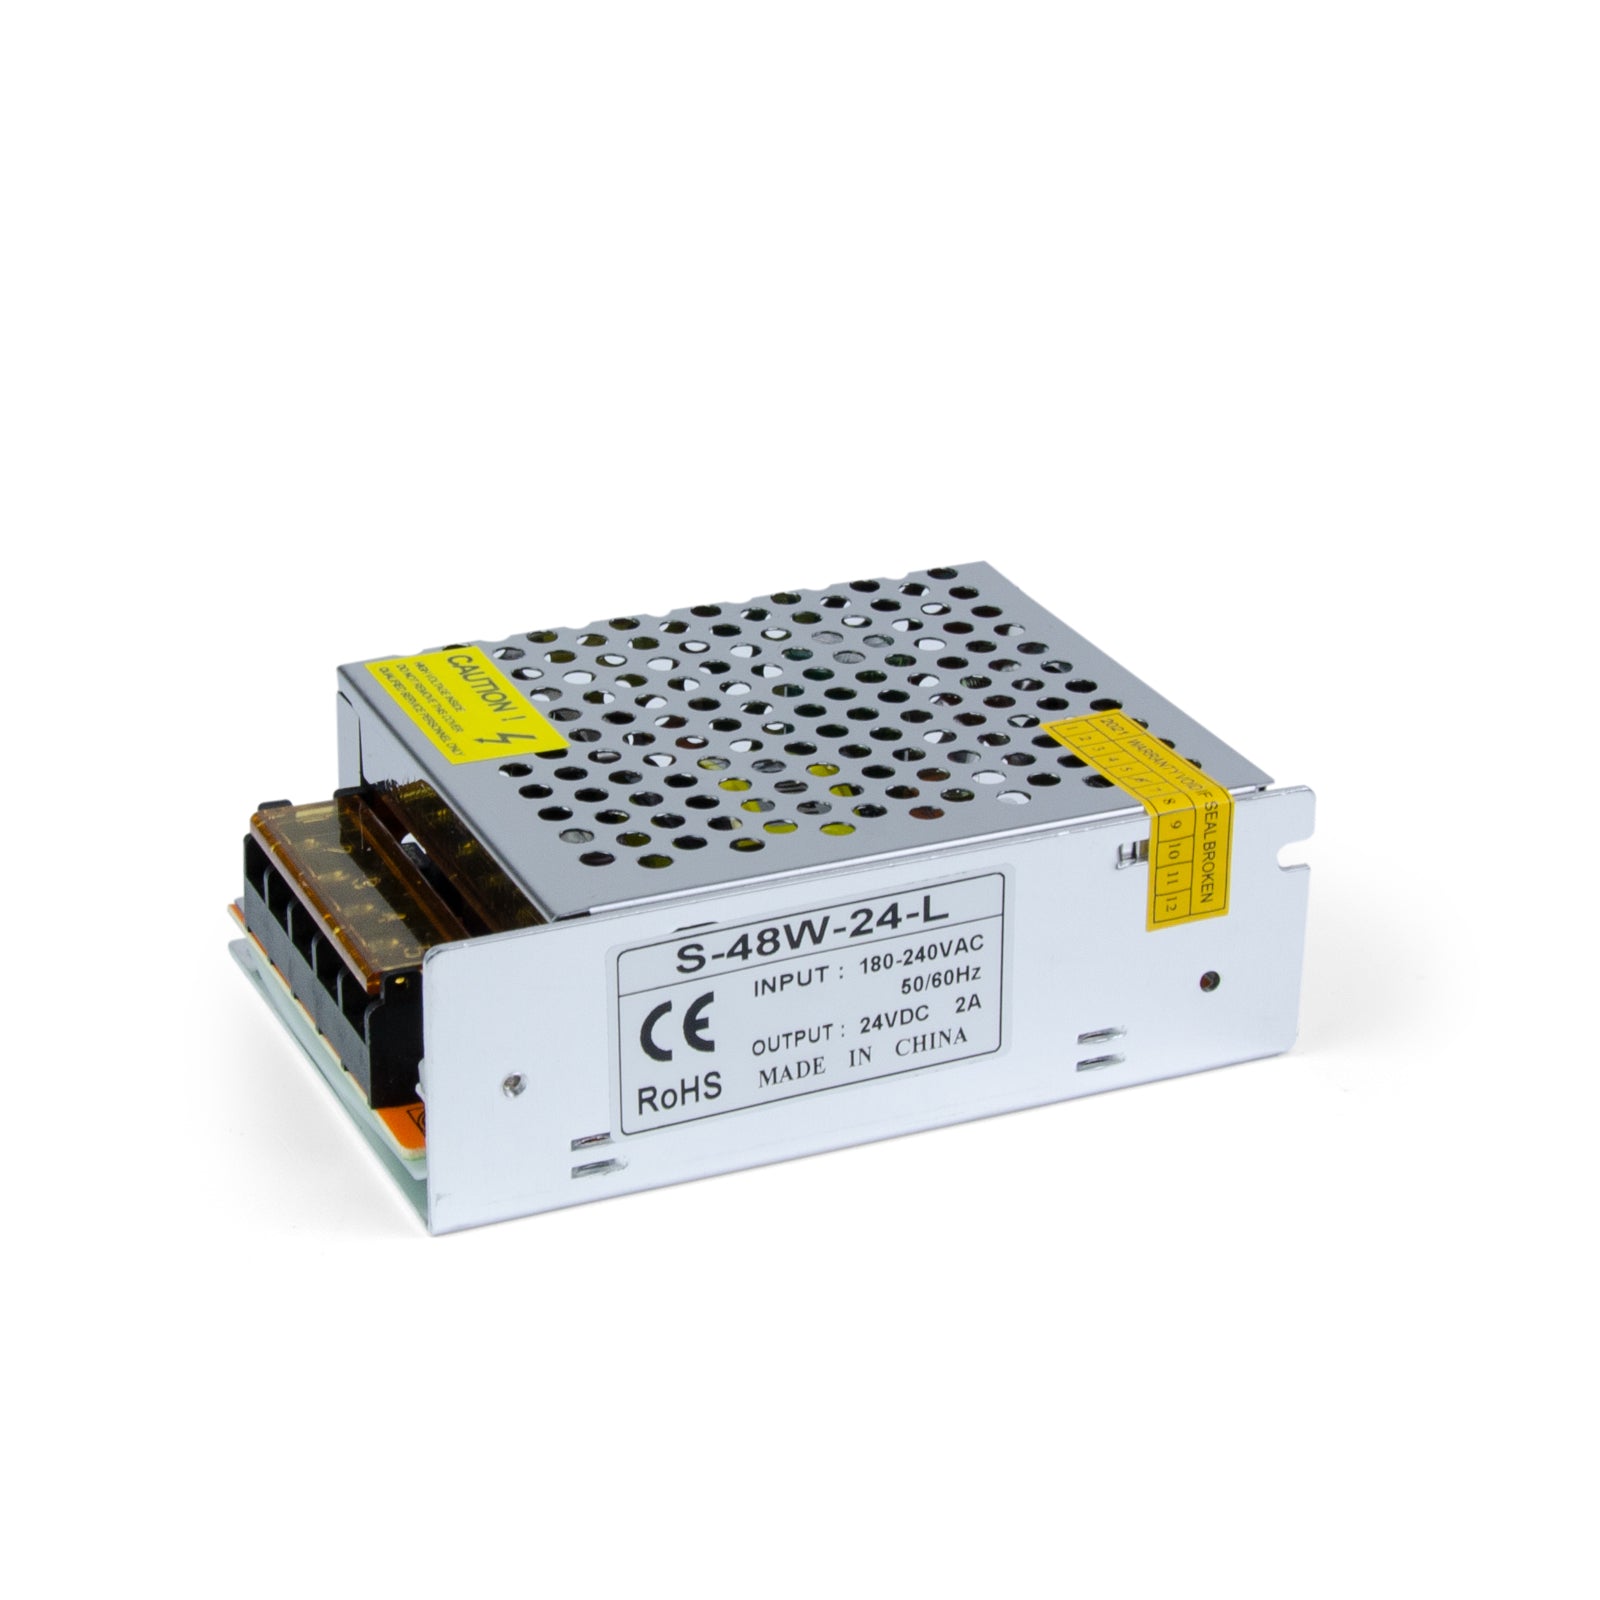 G.W.S. LED 24V / 48W Non-Waterproof LED Driver